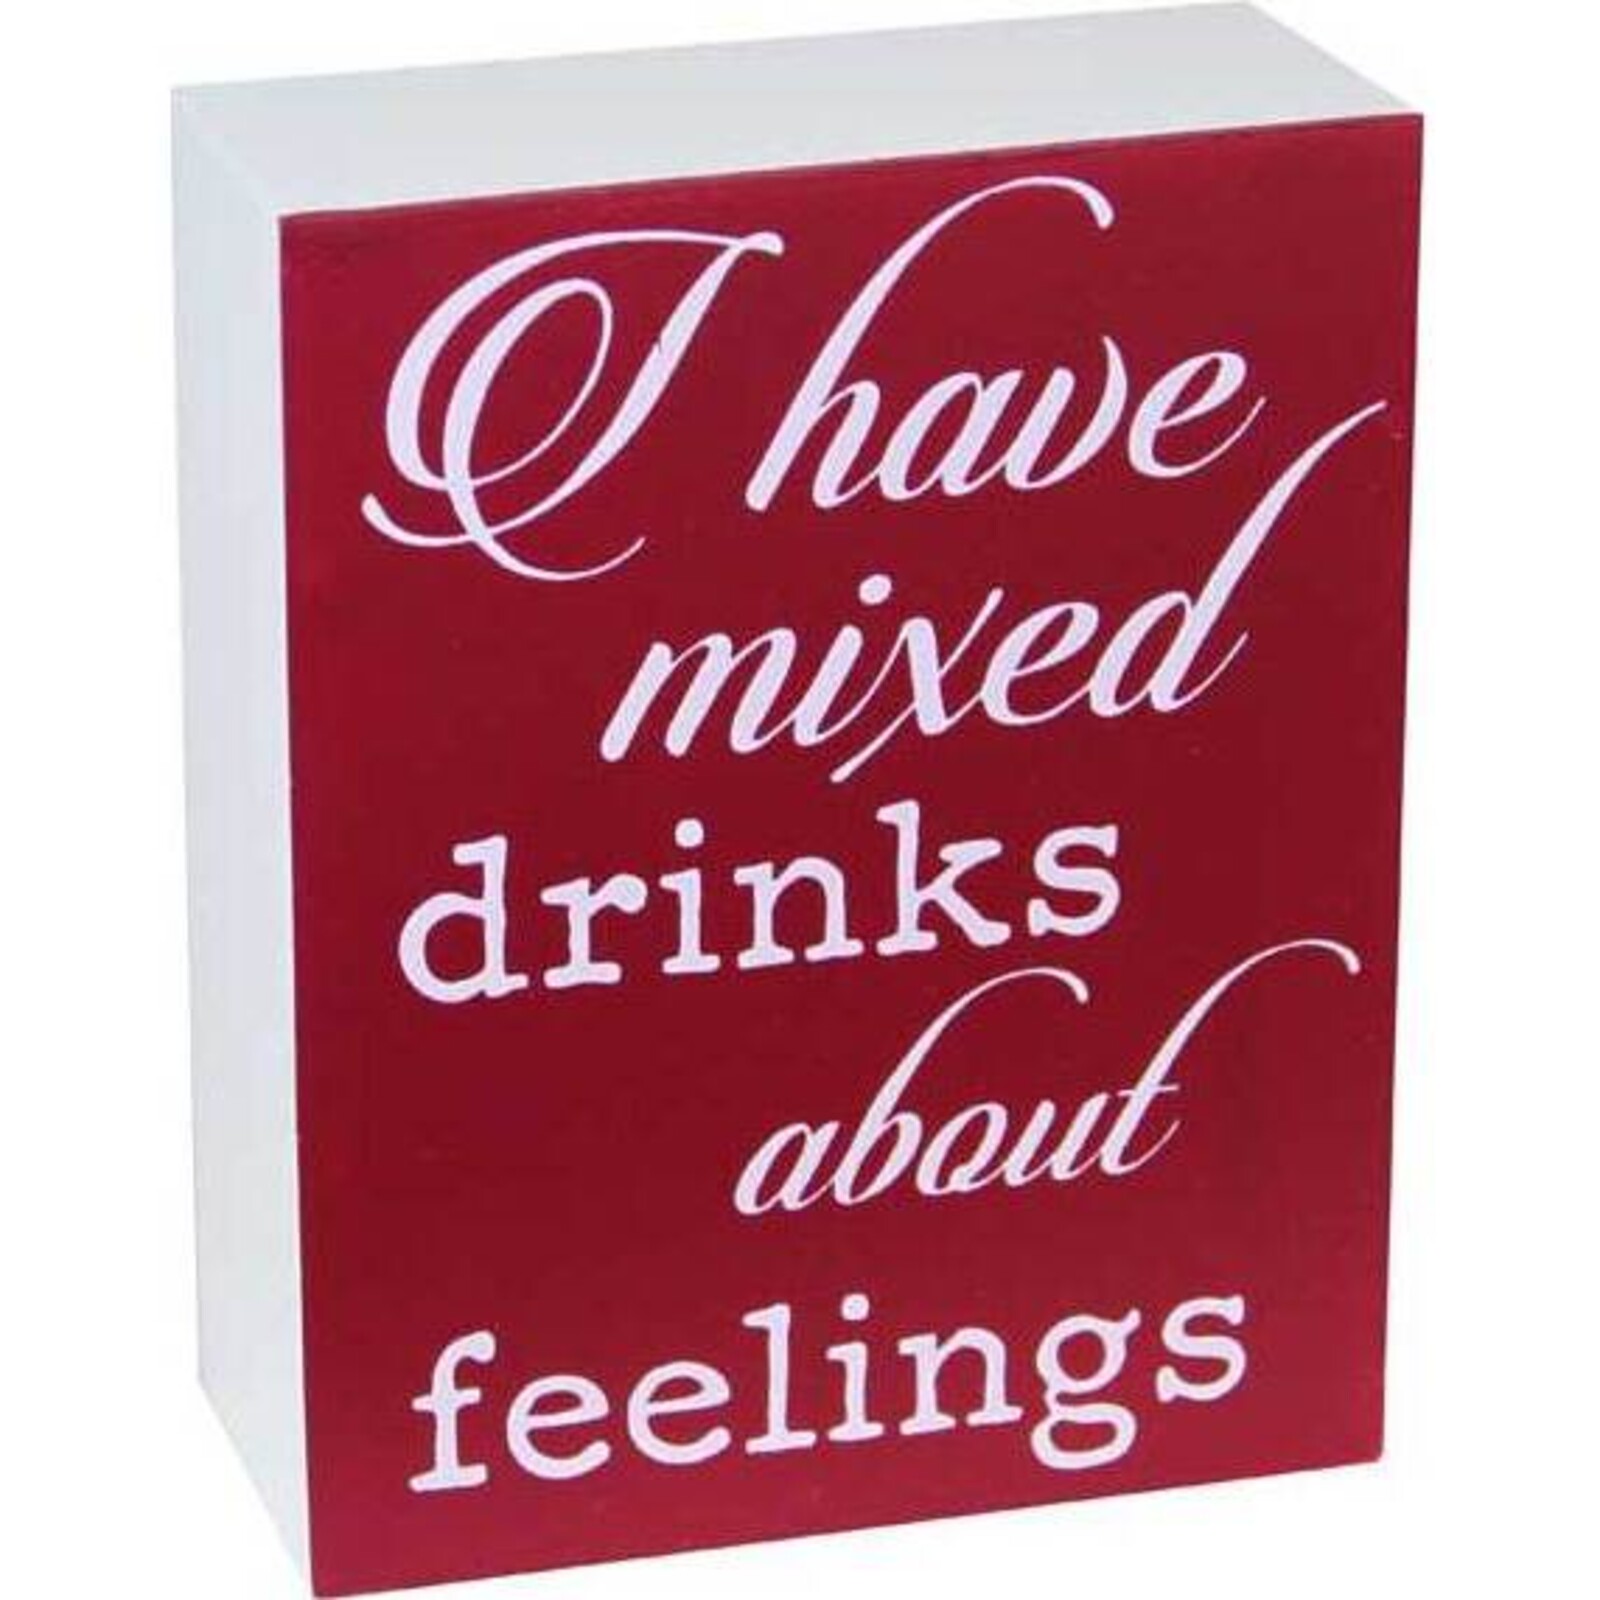 Sign Mixed Drinks about Feel